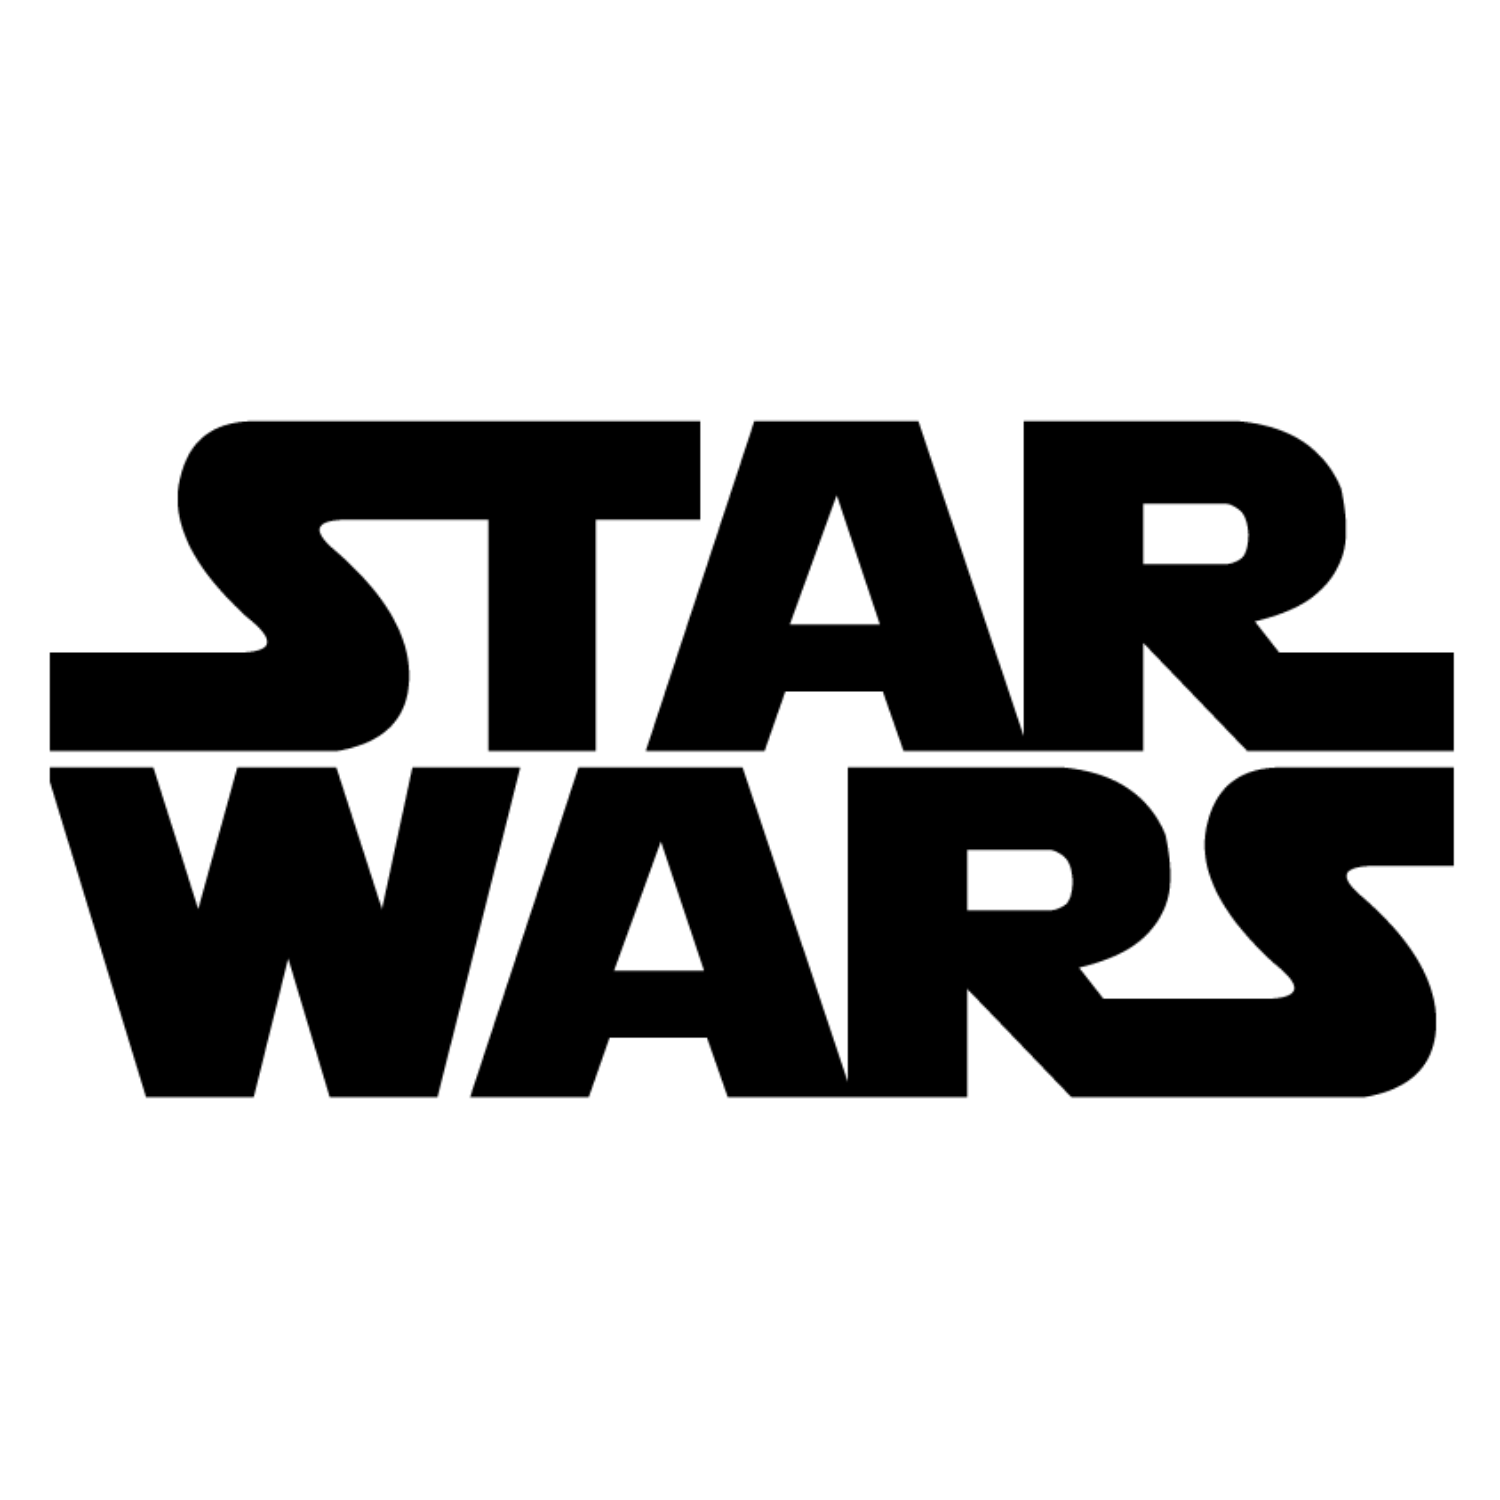 Shop Star Wars products